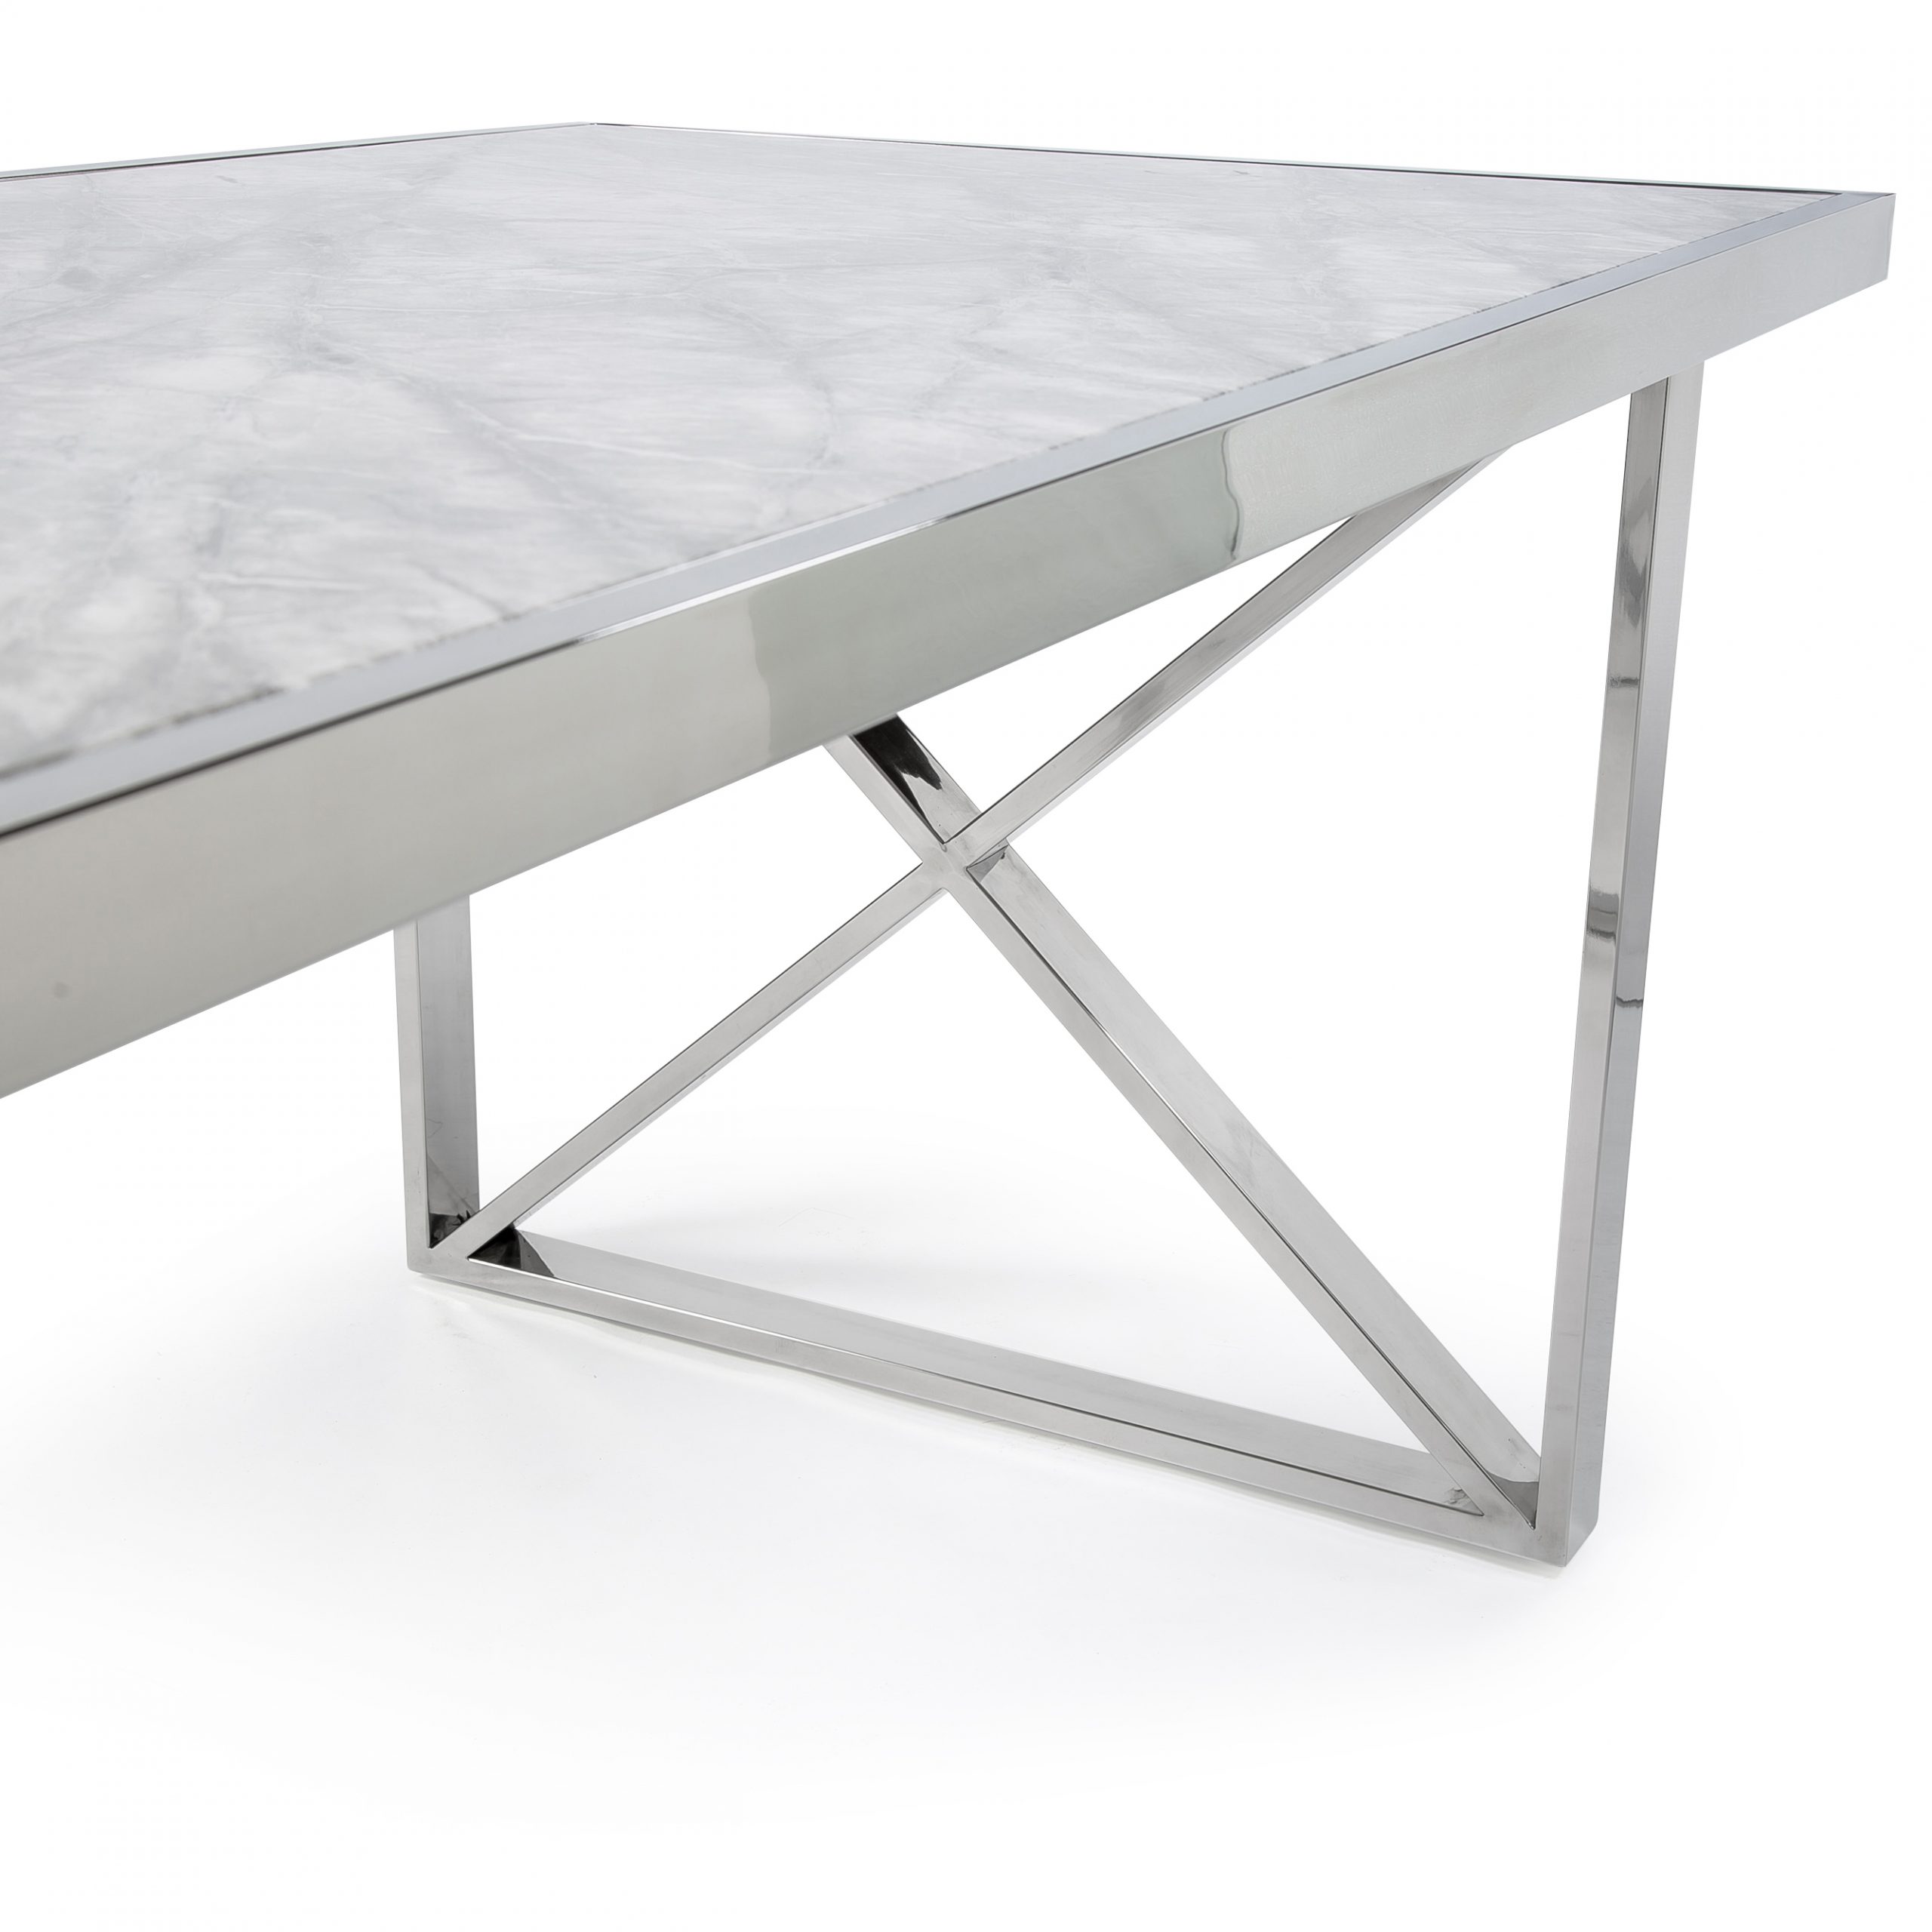 1.8M Tuscany Grey Marble Dining Room Table with Crossed Polished Steel Base